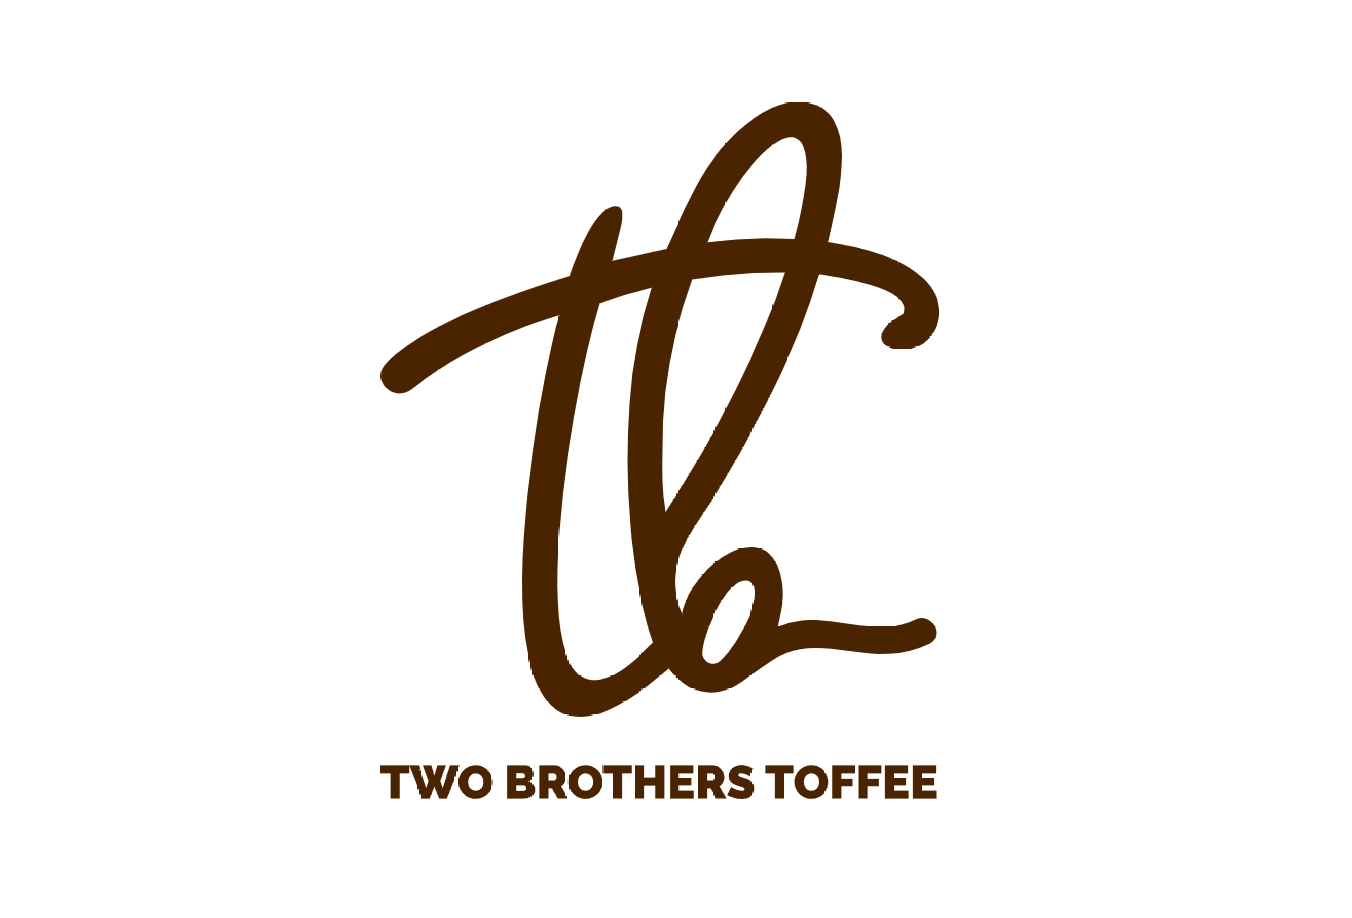 English Style Chocolate Covered Toffee - Two Brothers Toffee